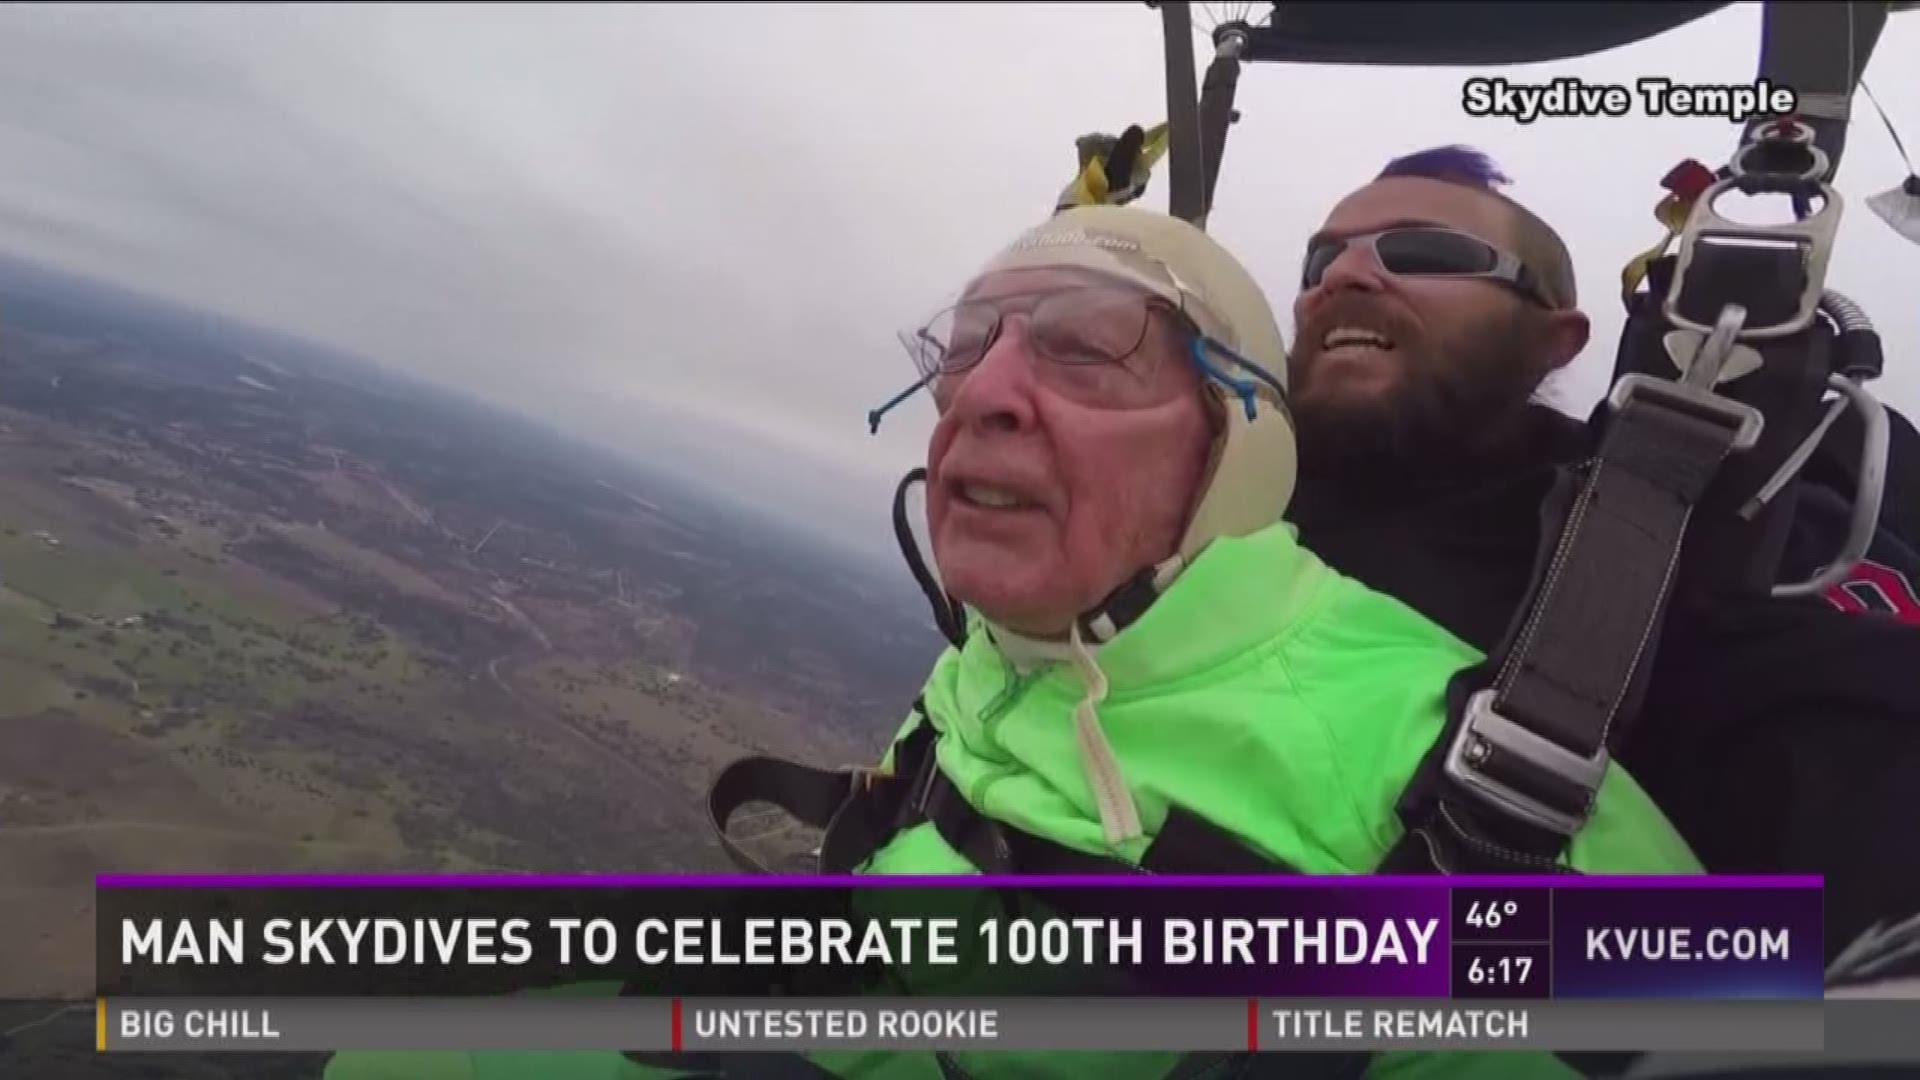 Al Blascke went skydiving to celebrate his 100th birthday Wednesday.